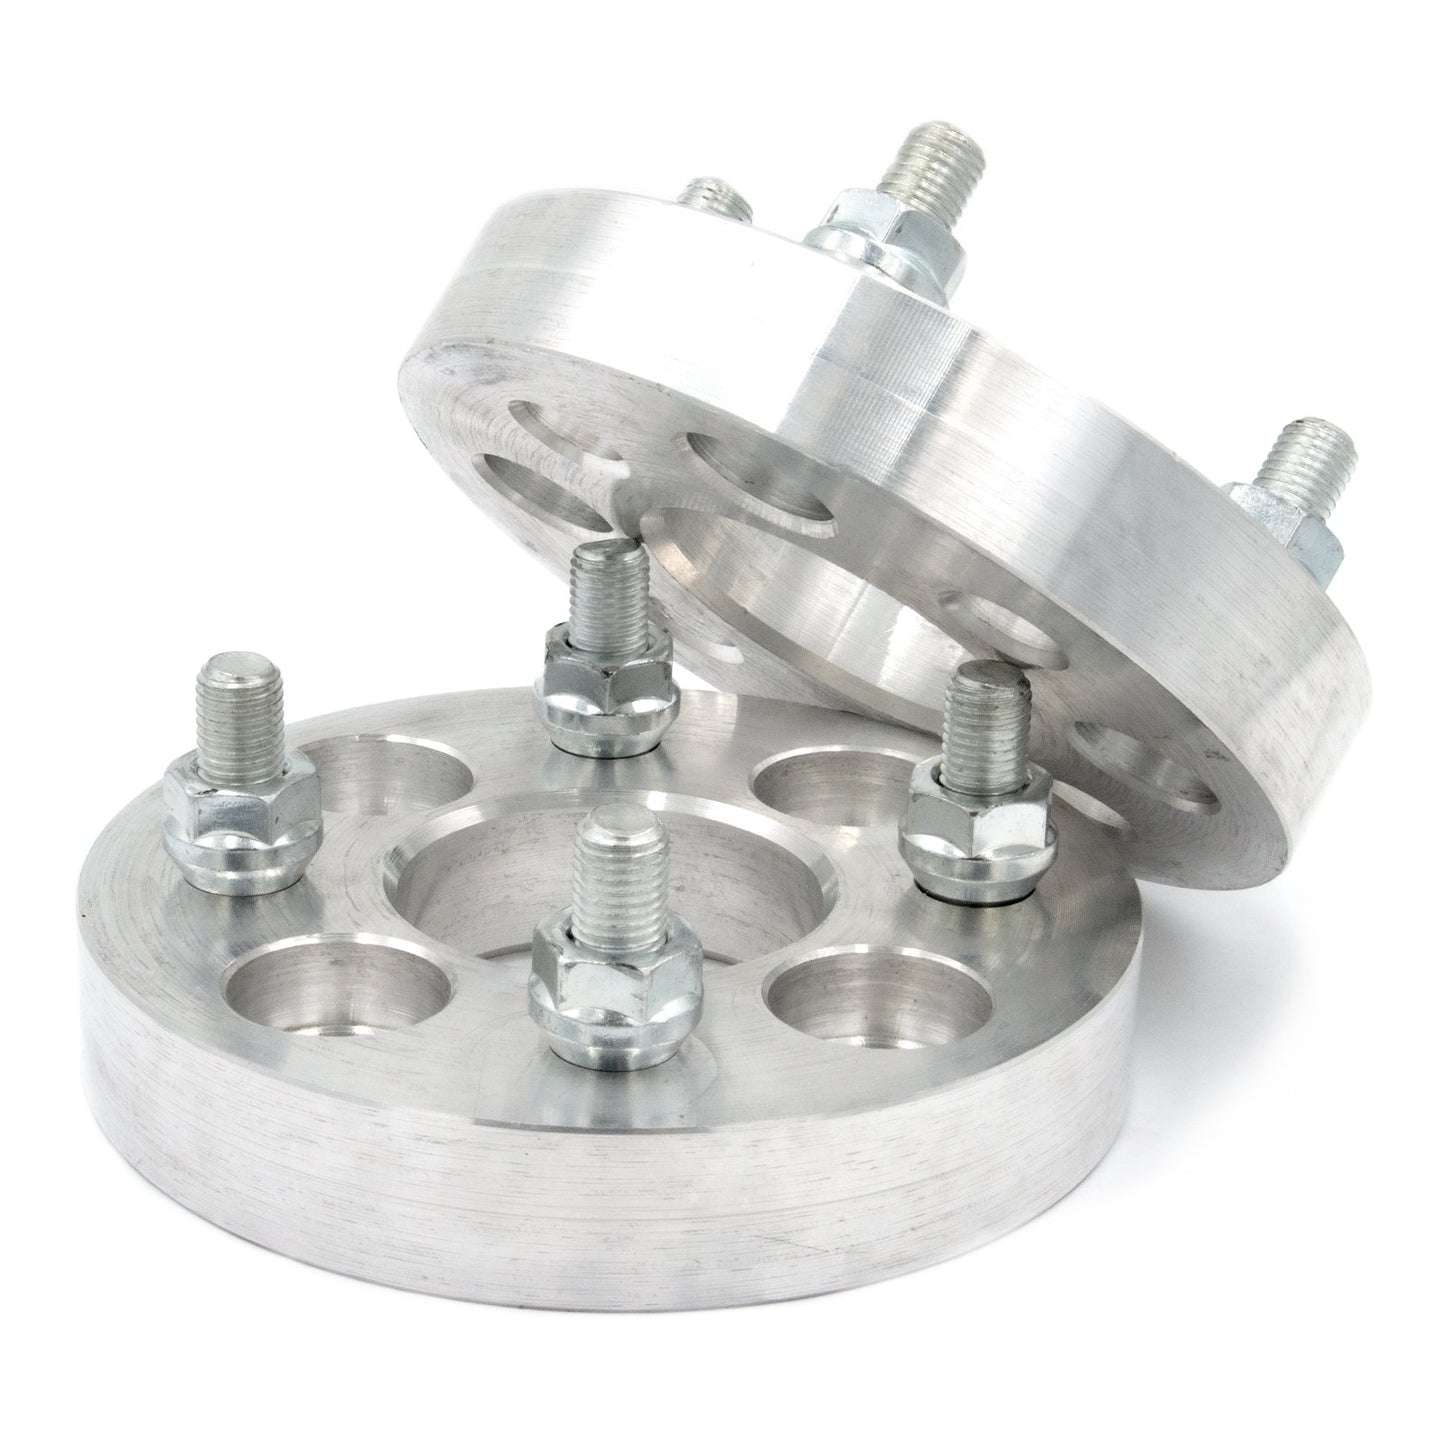 4x140 to 4x100 Wheel Spacer/Adapter - Thickness: 3/4"- 4"